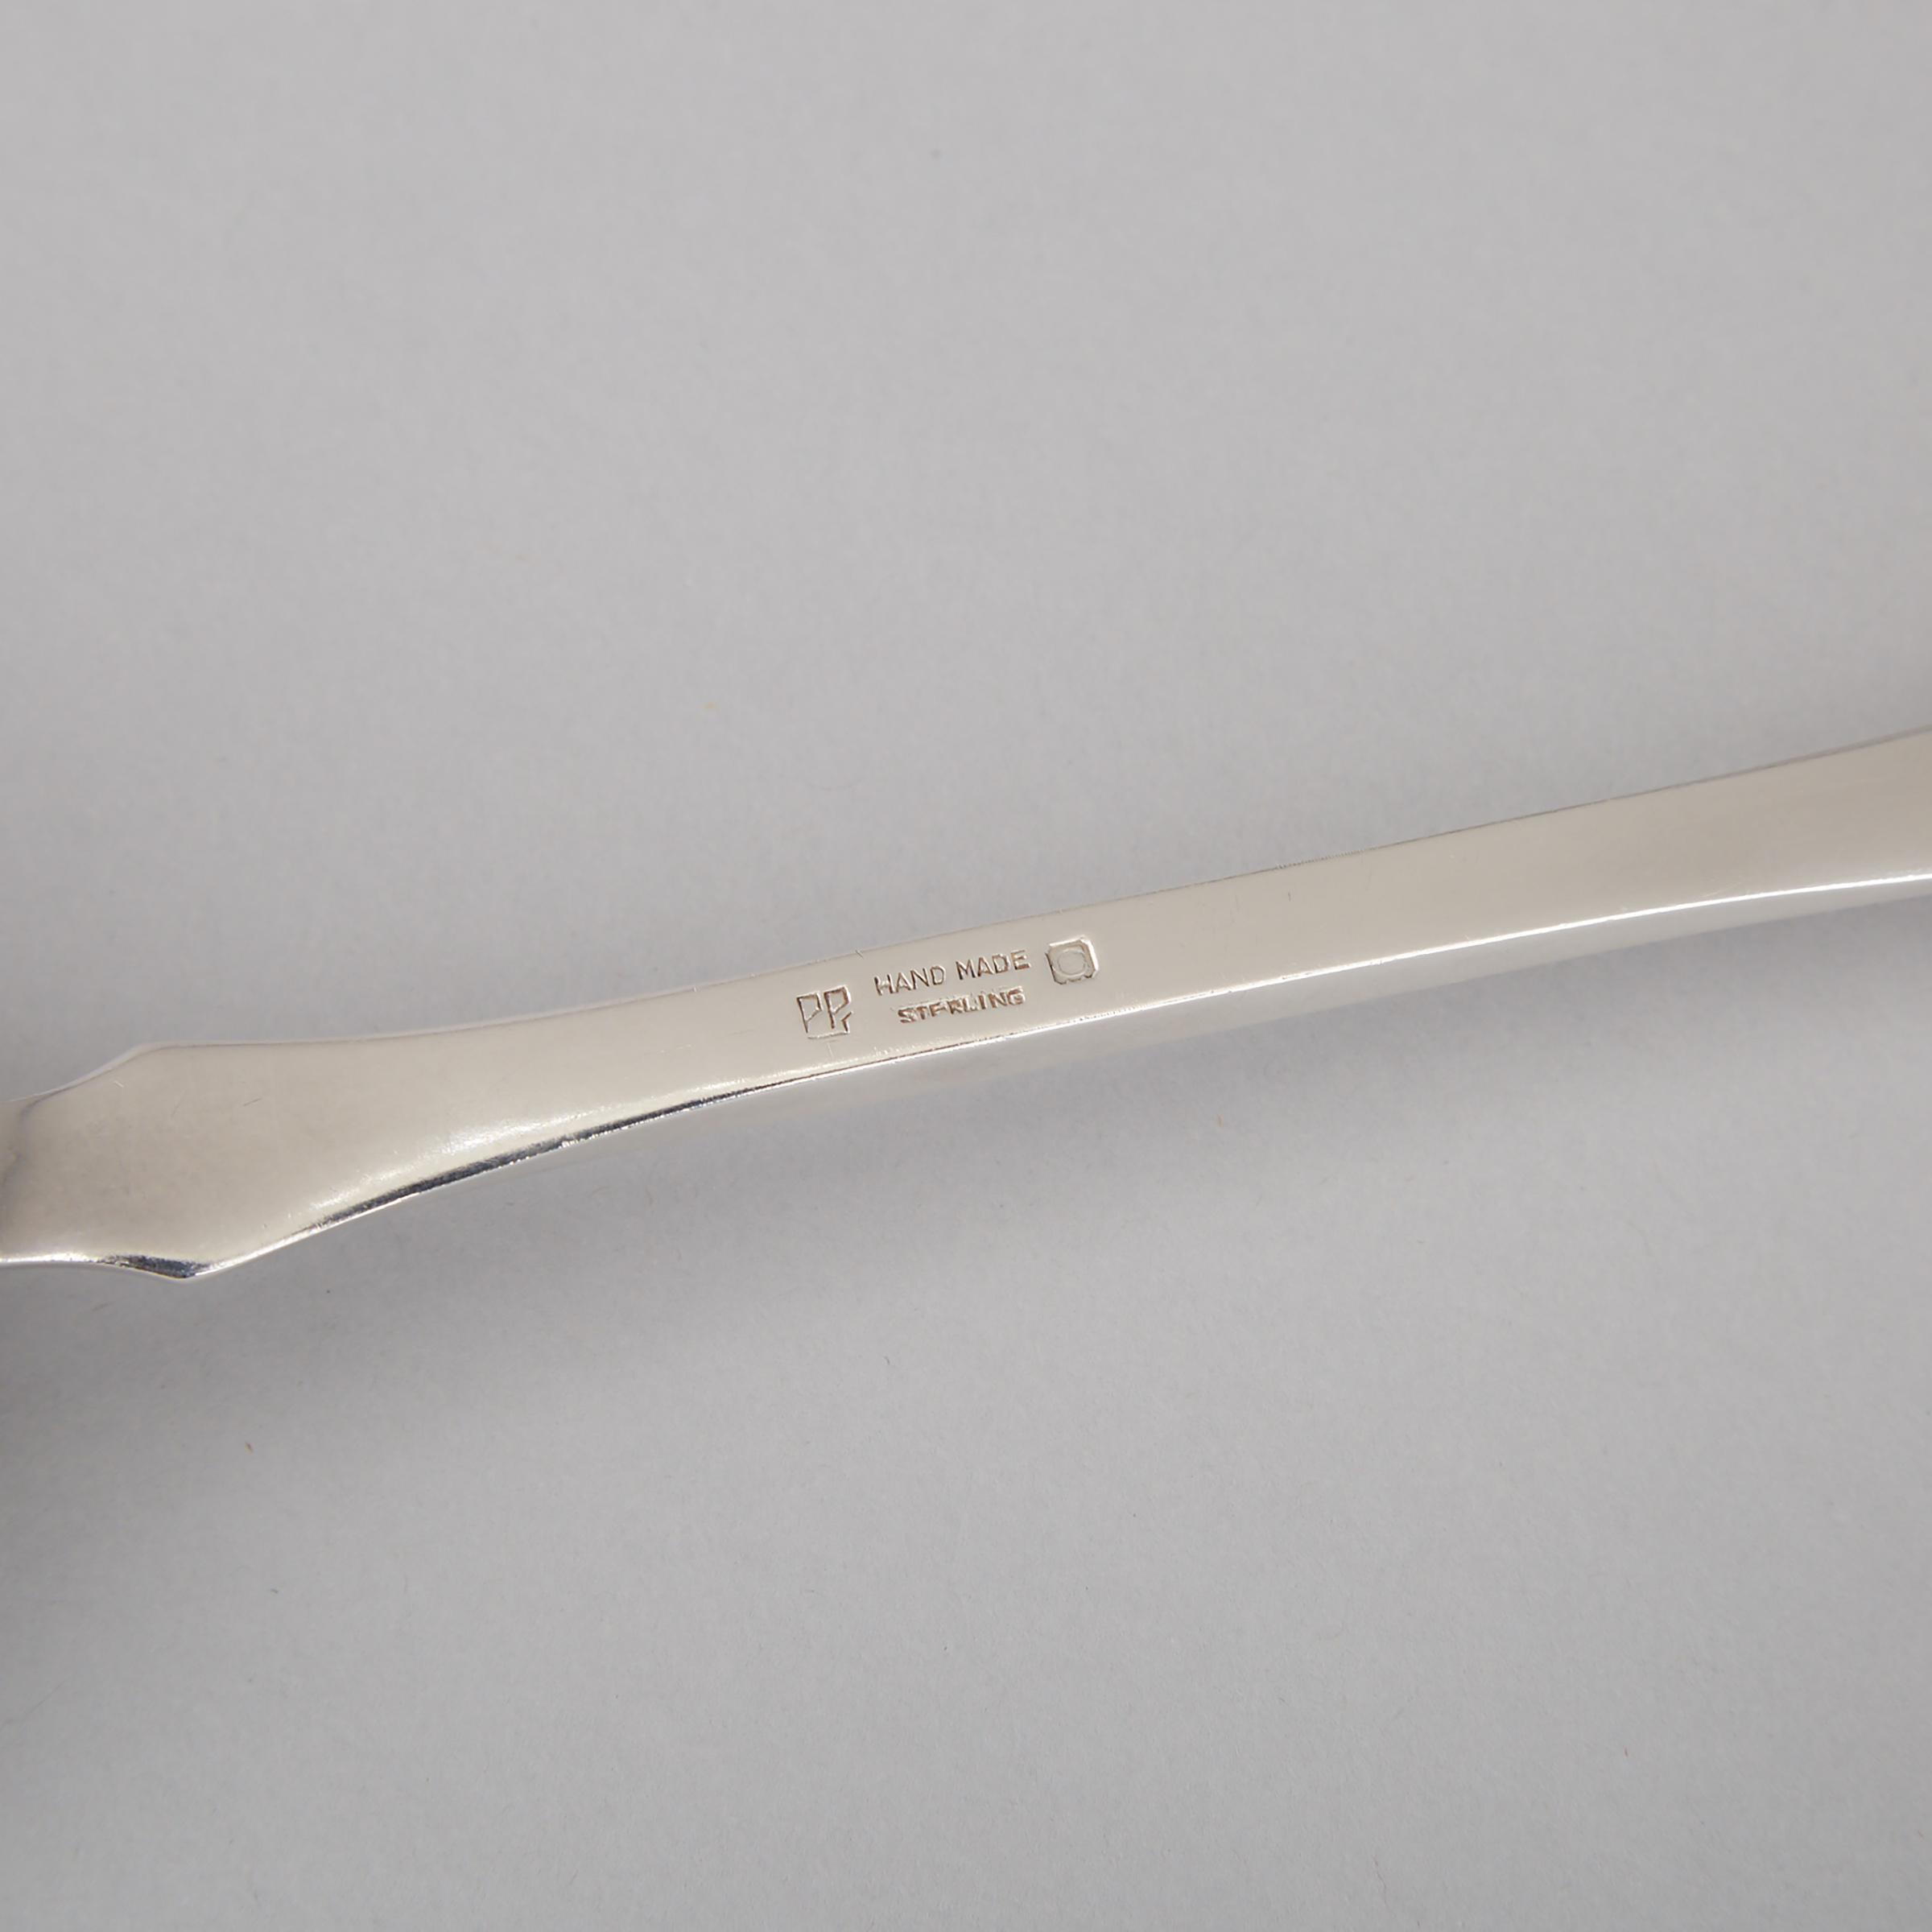 Canadian Silver Serving Spoon and Fork, Carl Poul Petersen, Montreal, Que., mid-20th century